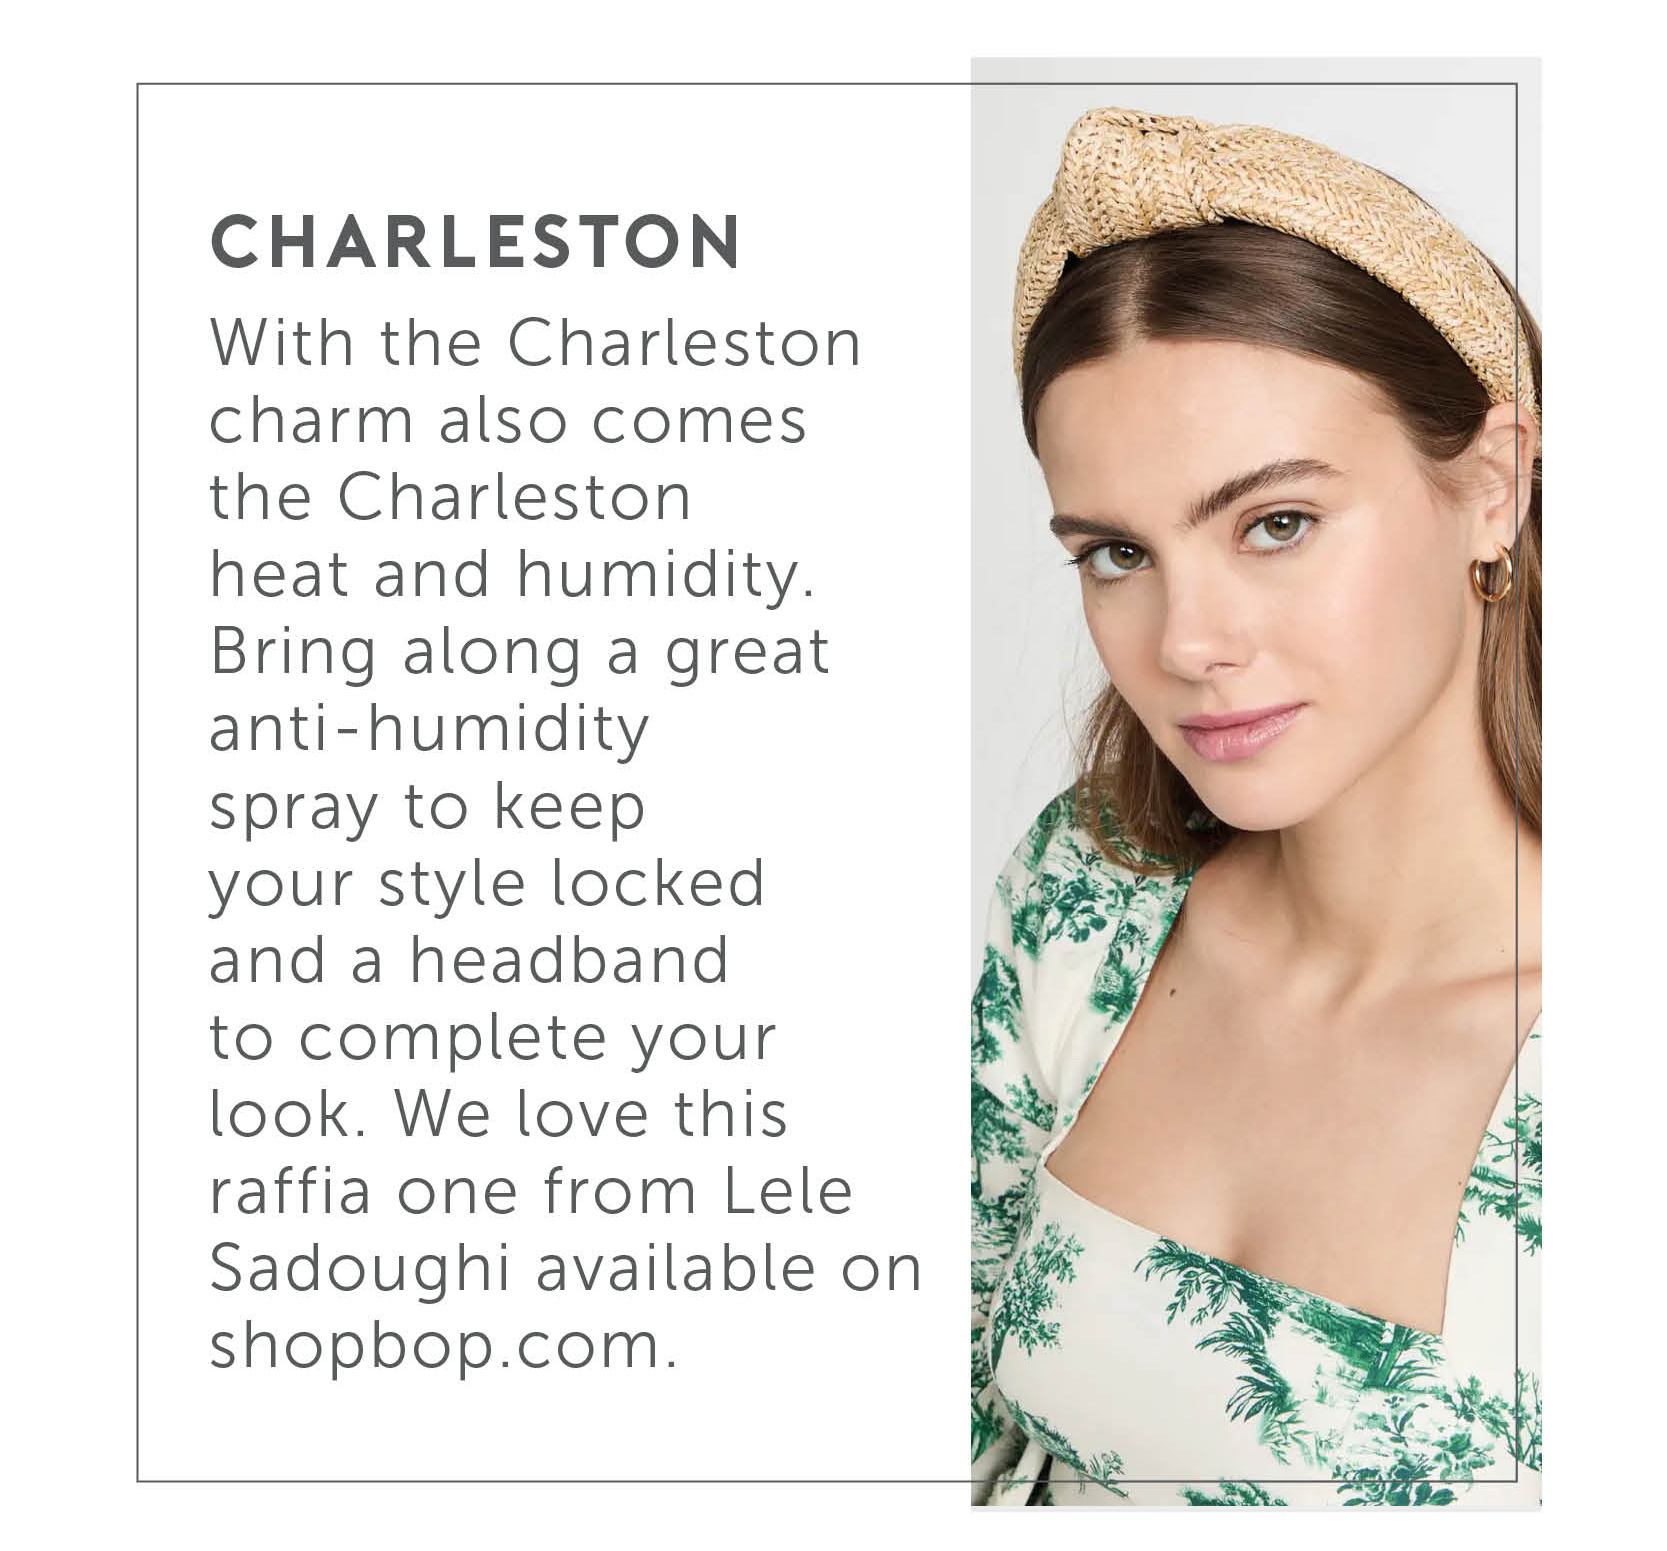 Charleston - With the Charleston charm also comes the Charleston heat and humidity. Bring along a great anti-humidity spray to keep your style locked and a headband to complete your look. We love this raffia one from Lele Sadoughi available on shopbop.com